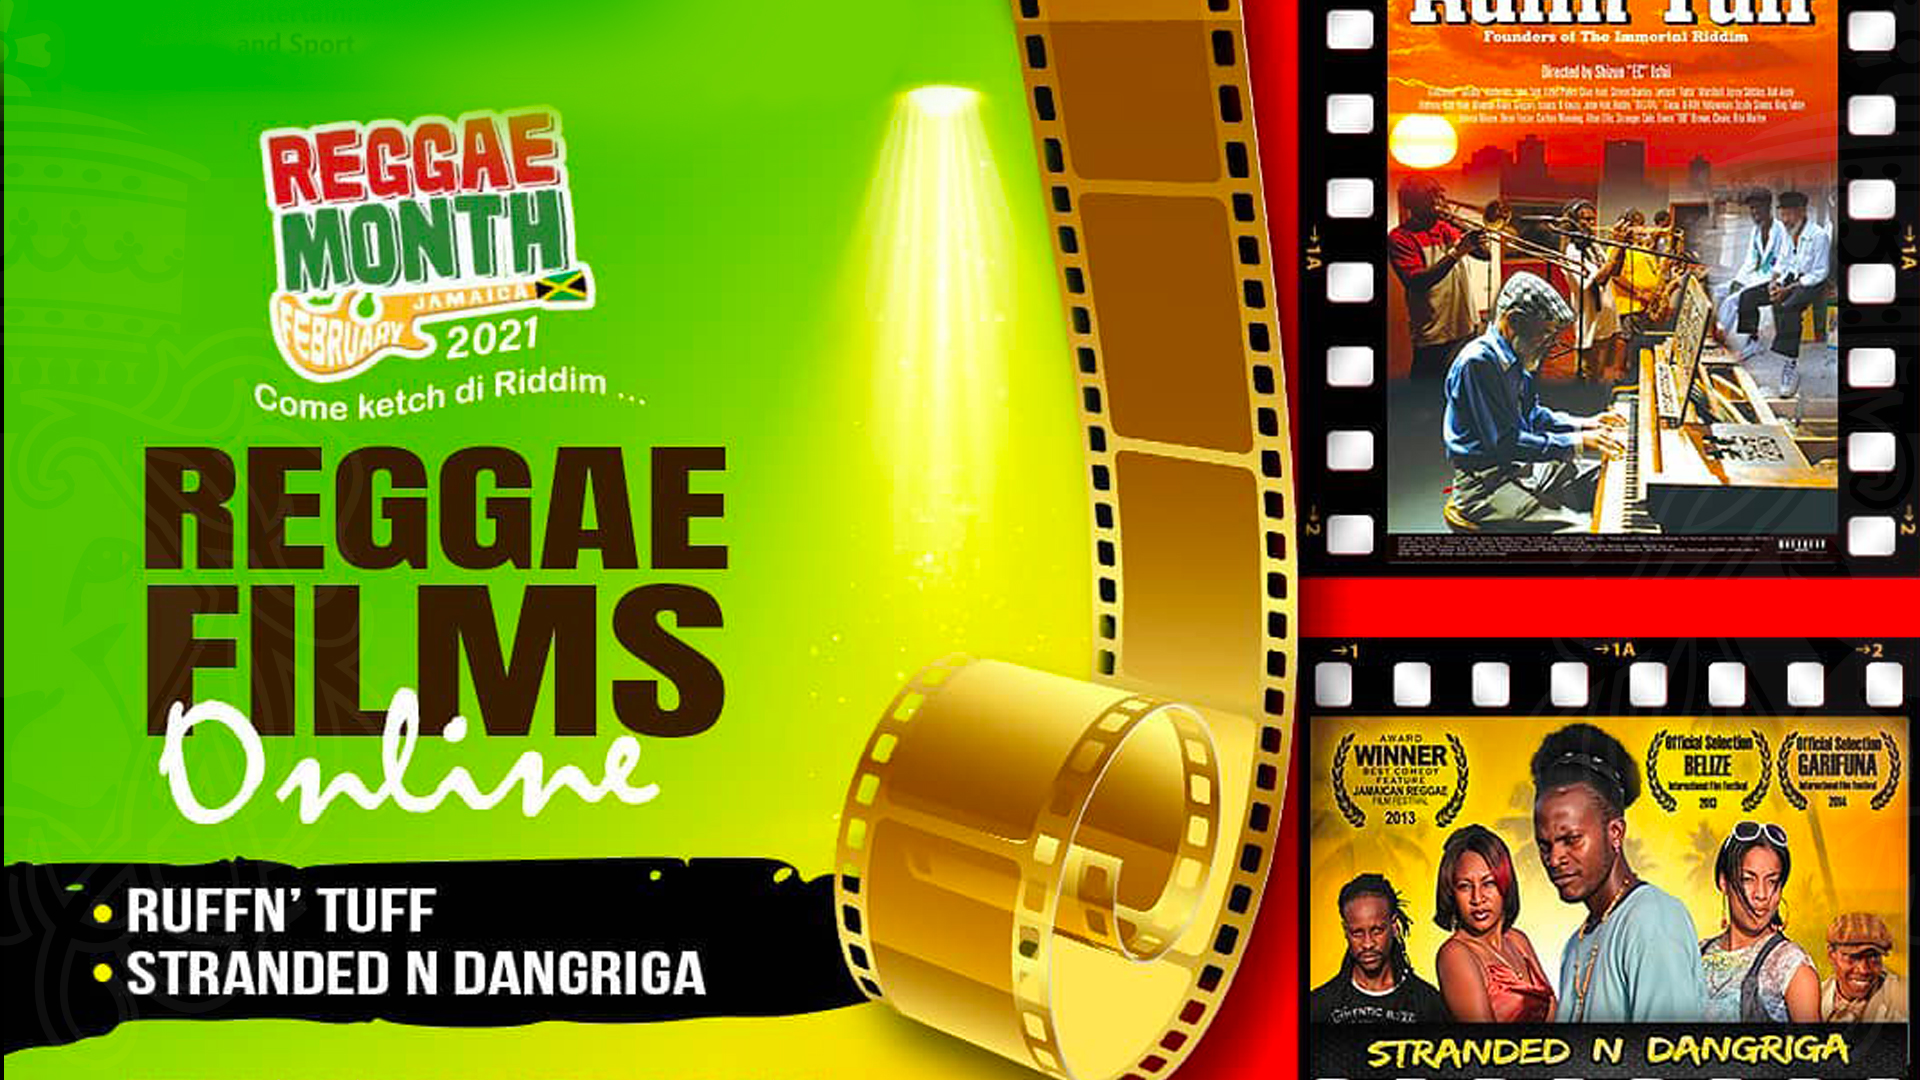 Reggae Month Jamaica - February 5 - Watch Reggae Films Online and see great festivals Ah Yaad!